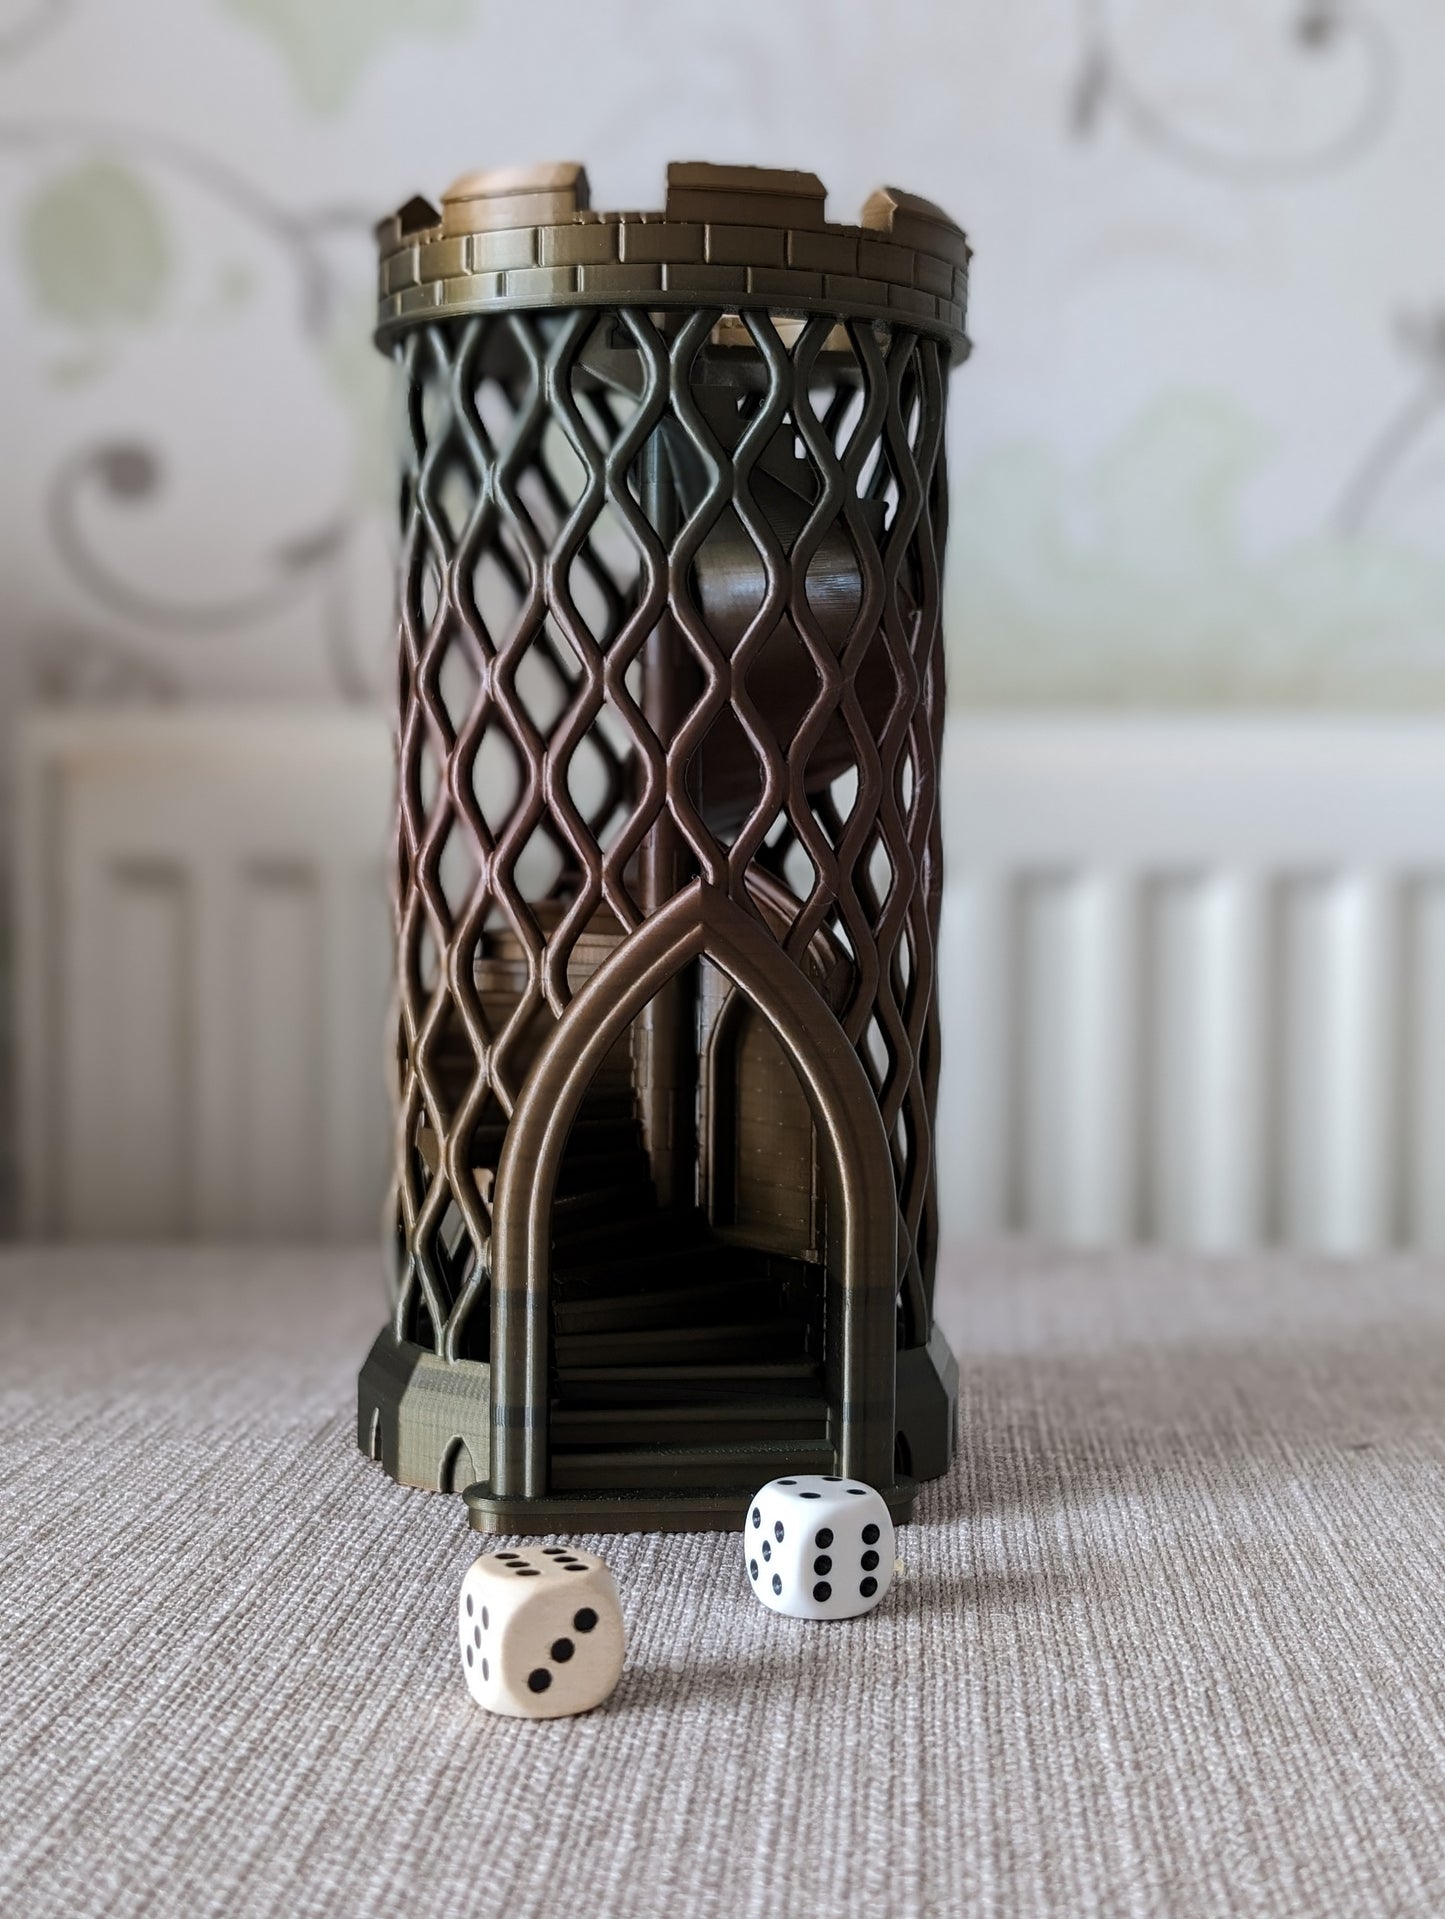 Castle turret dice tower from the front without dice catcher